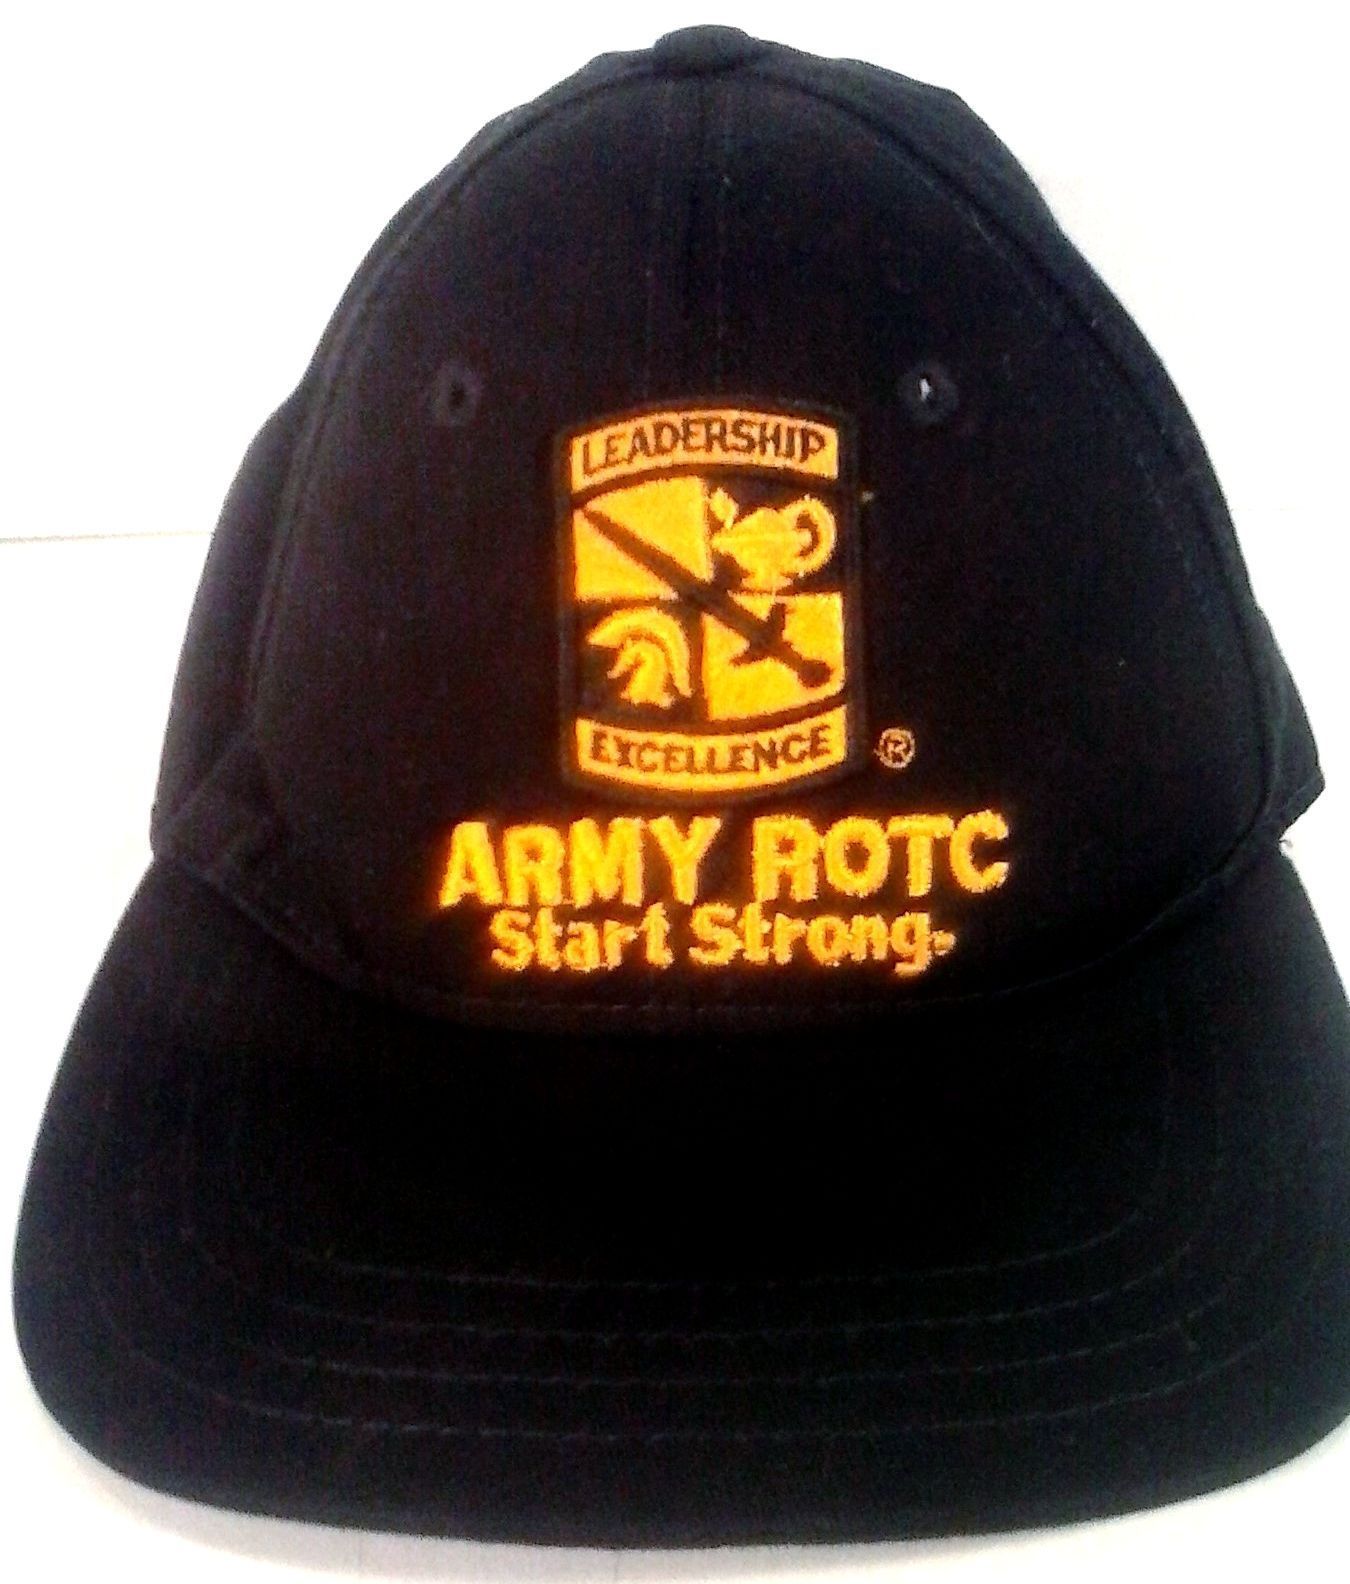 ARMY ROTC START STRONG LEADERSHIP EXCELLENCE MADE IN USA HAT CAP - $17.76